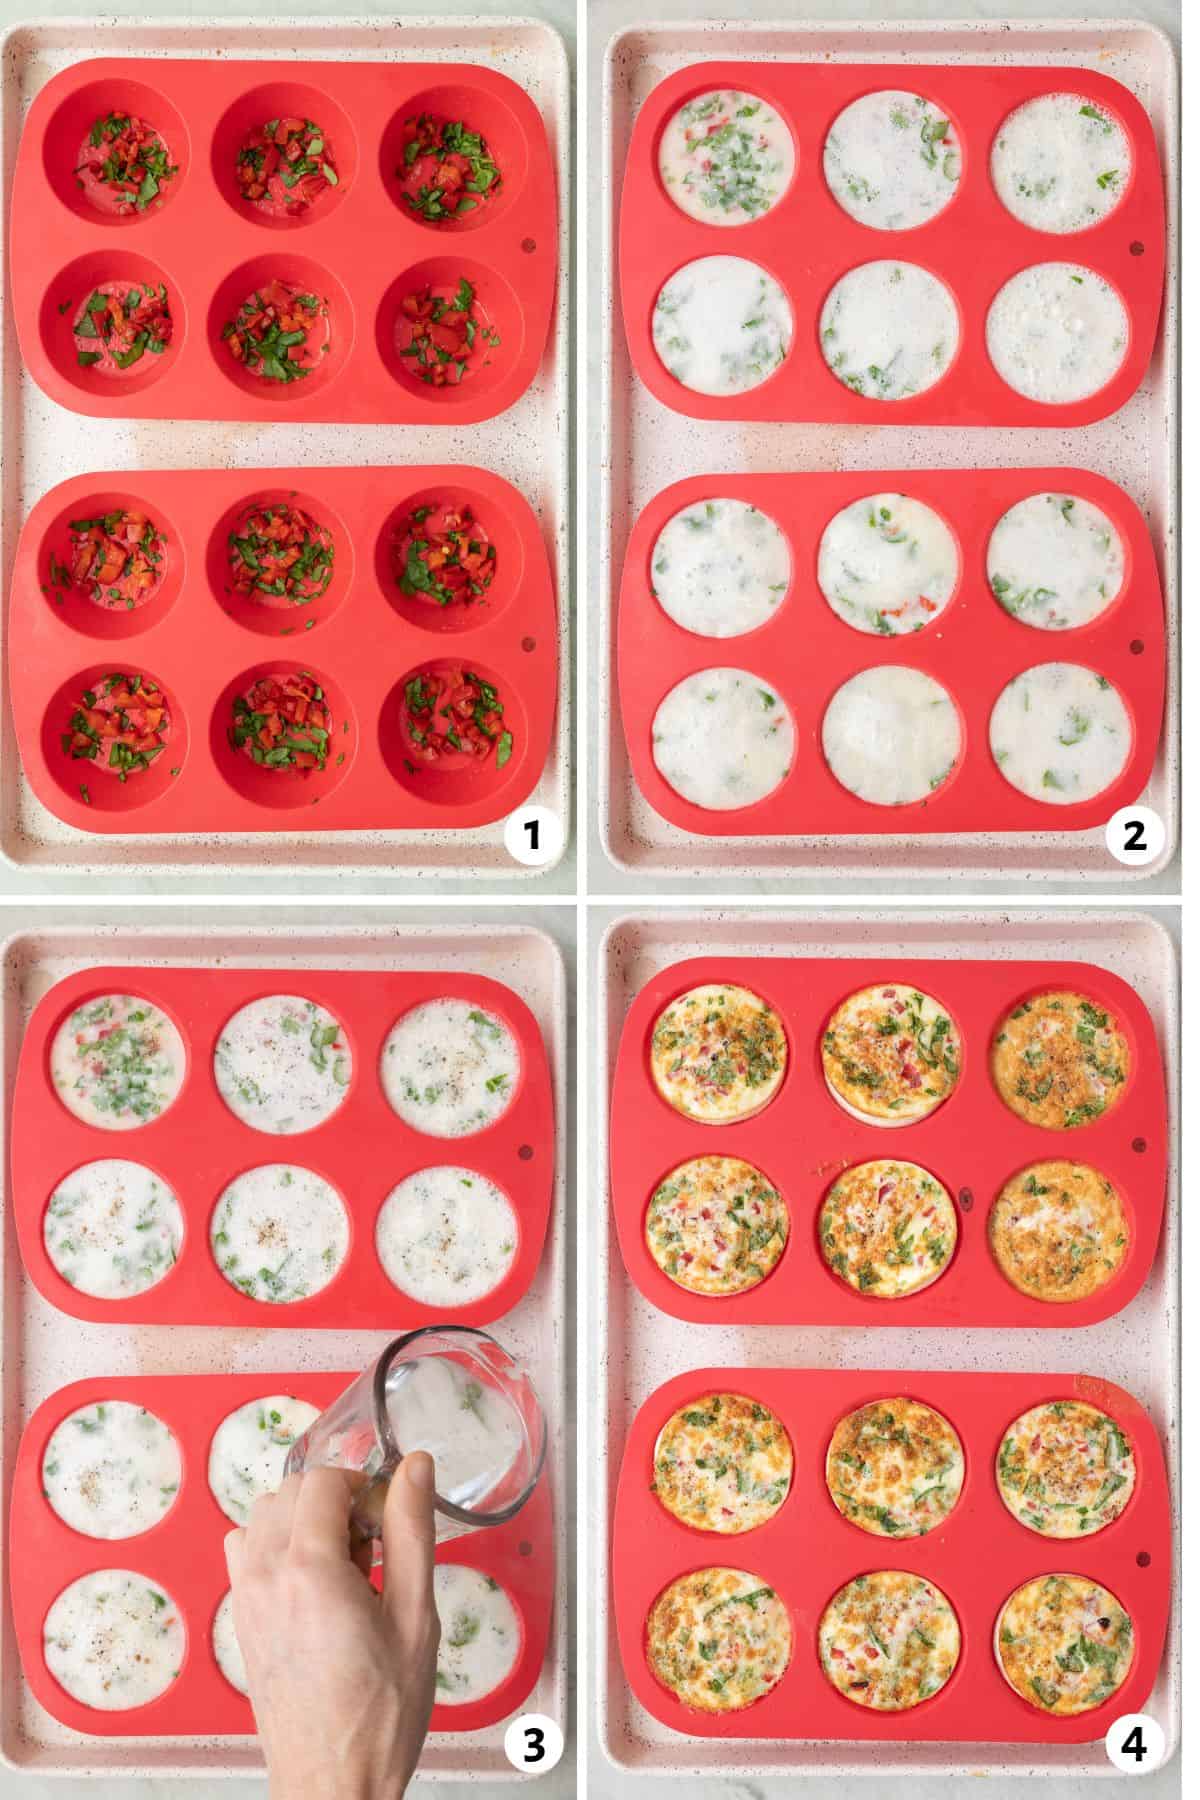 4 image collage making recipe in making recipe in a silicone muffin pan: 1- chopped red pepper and spinach divided into 12 cups, 2- egg white mixture added, 3- water being poured around muffin pans into a baking sheet, 4- after baking.